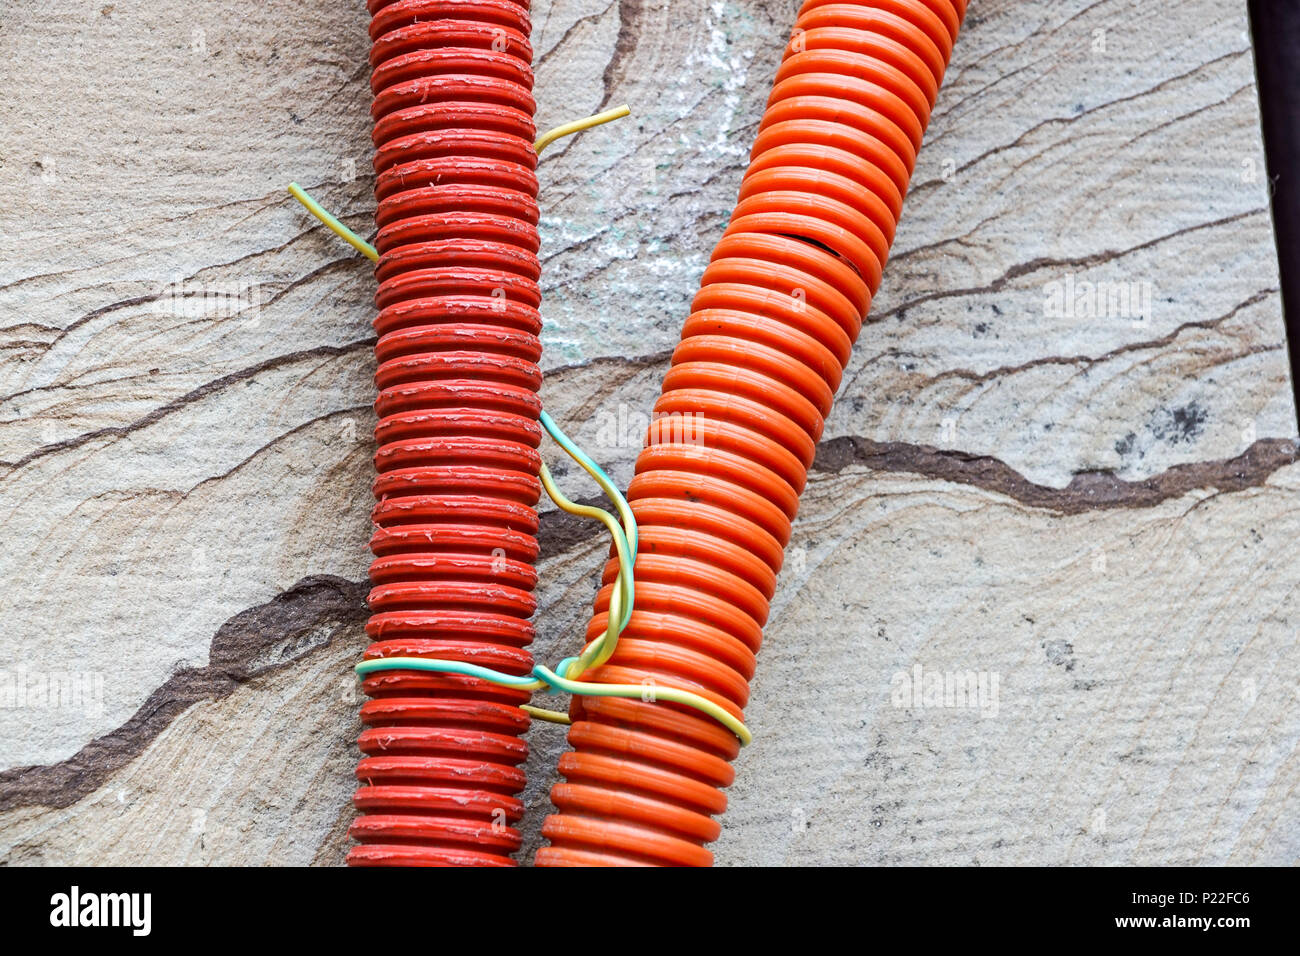 red plastic pipes for electric wires Stock Photo